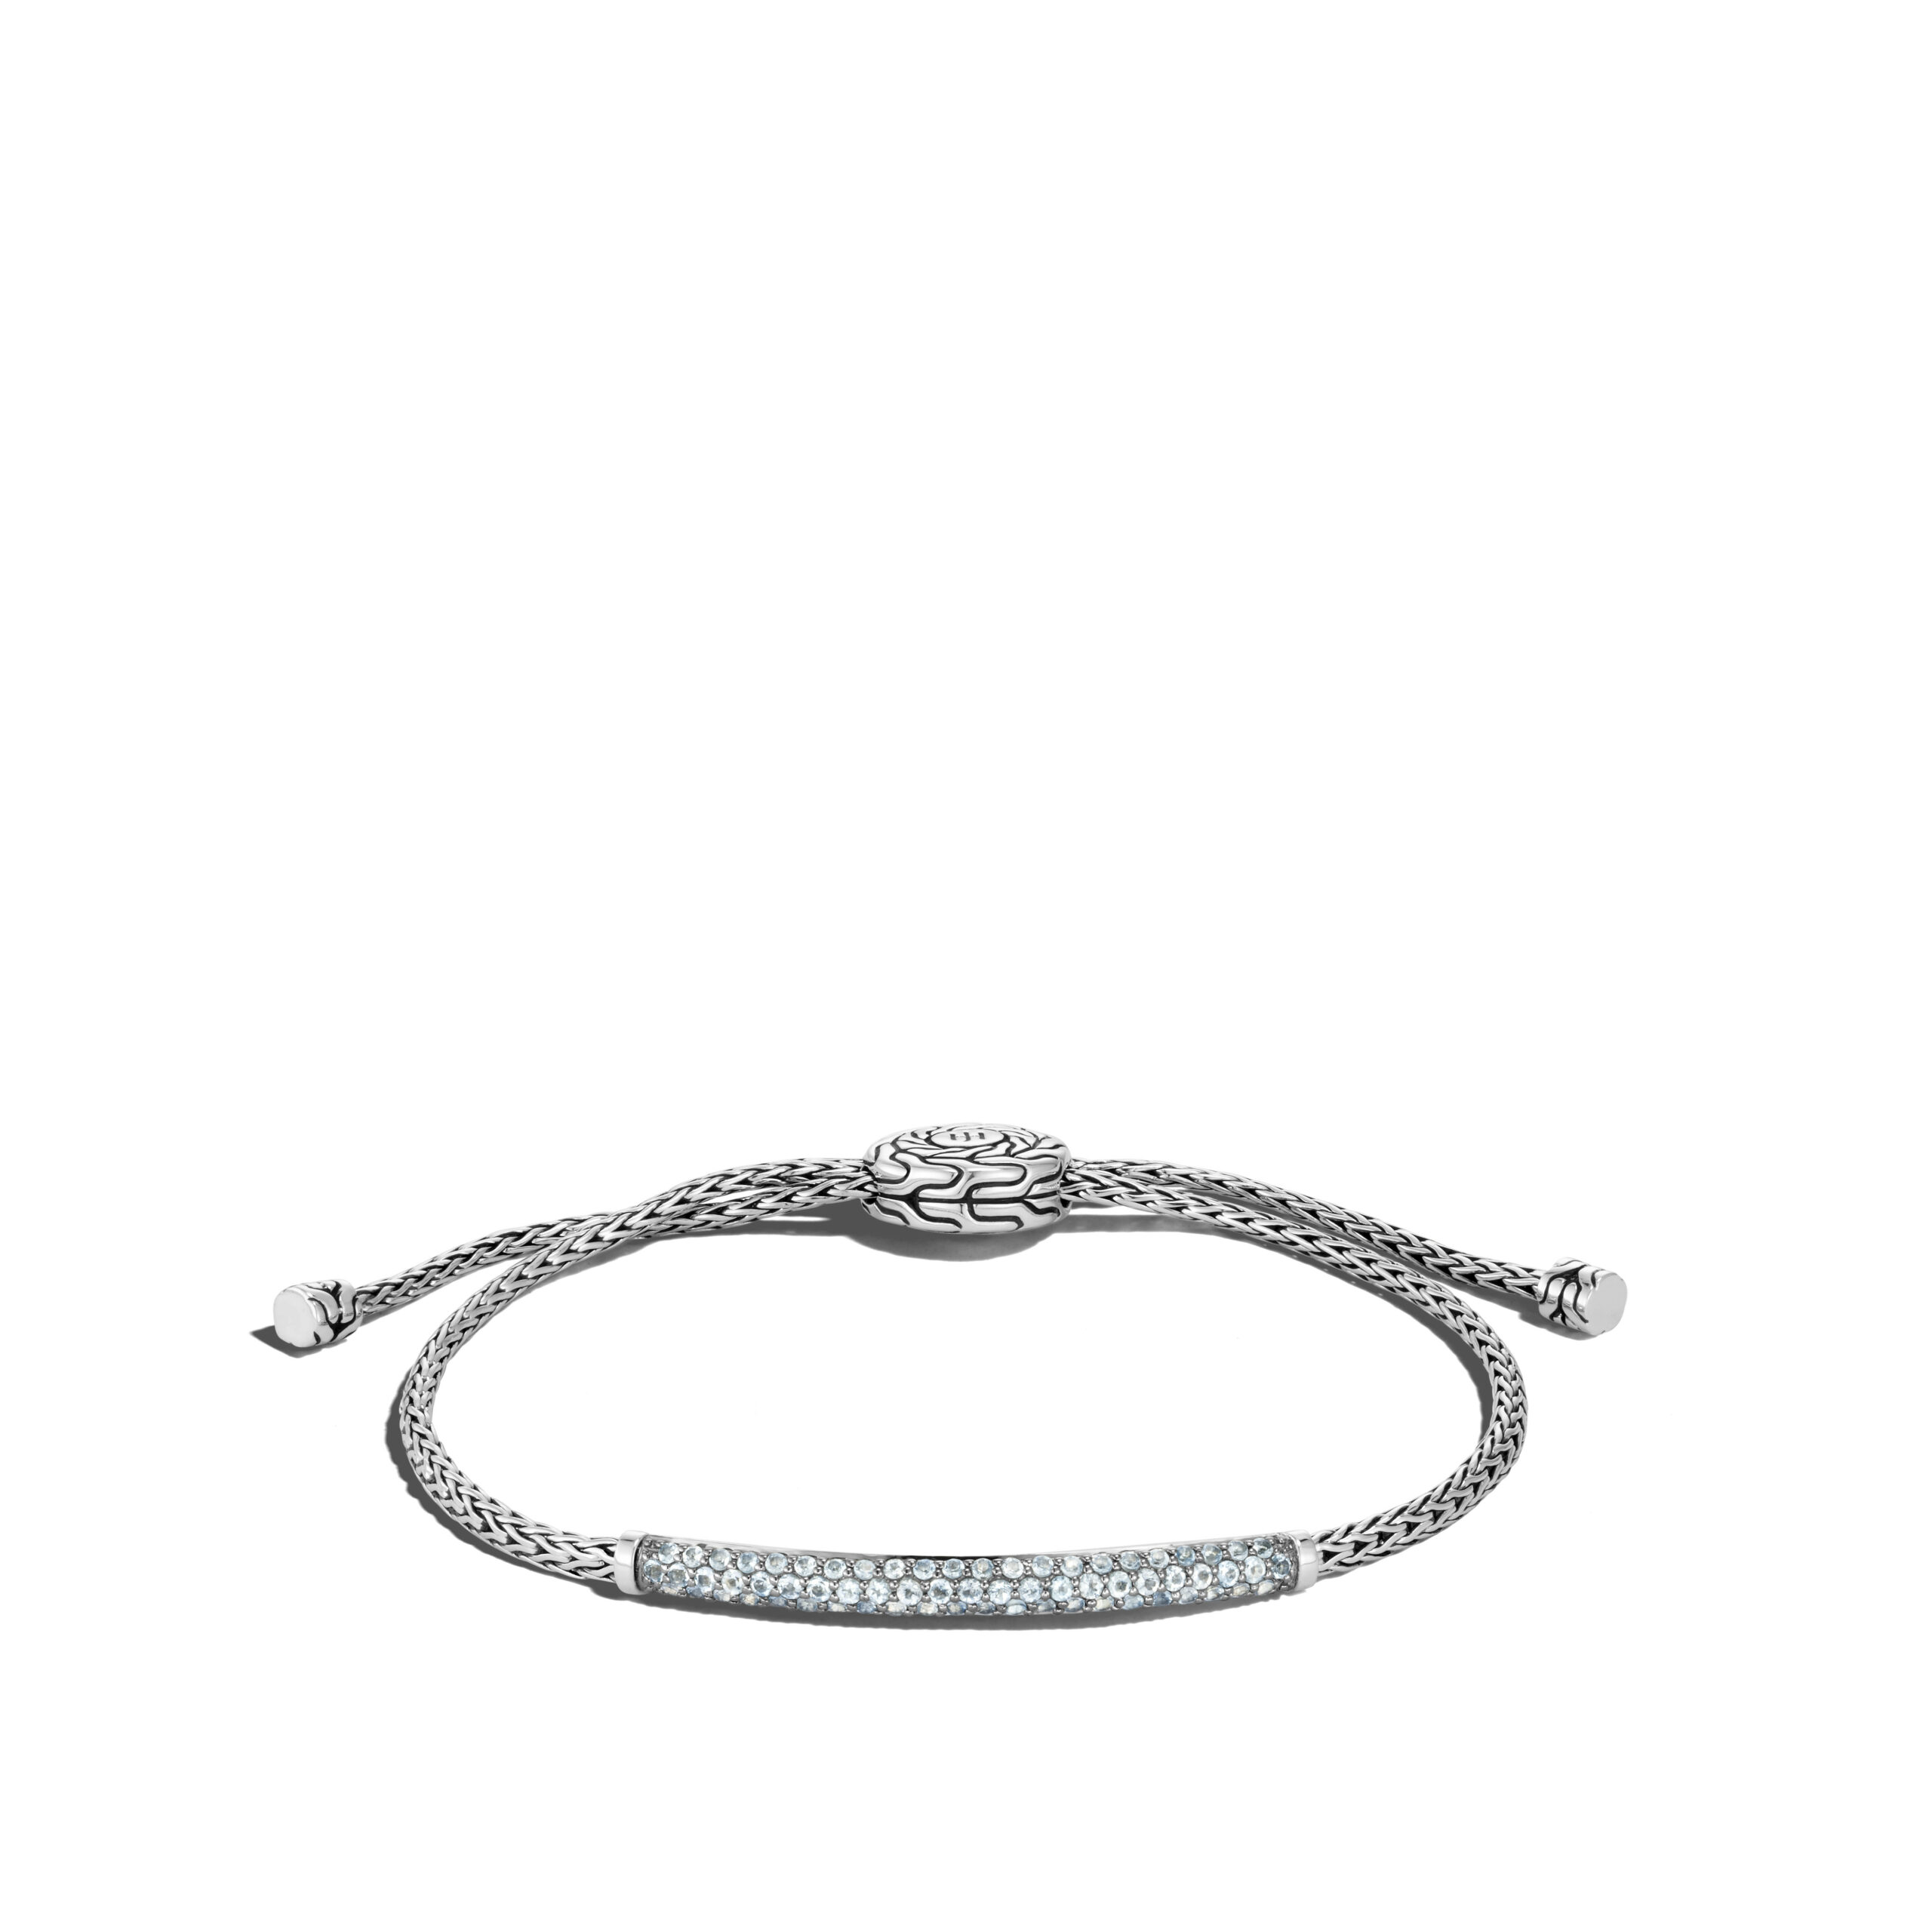 This bracelet by John Hardy is crafted from sterling silver and features aquamarine.